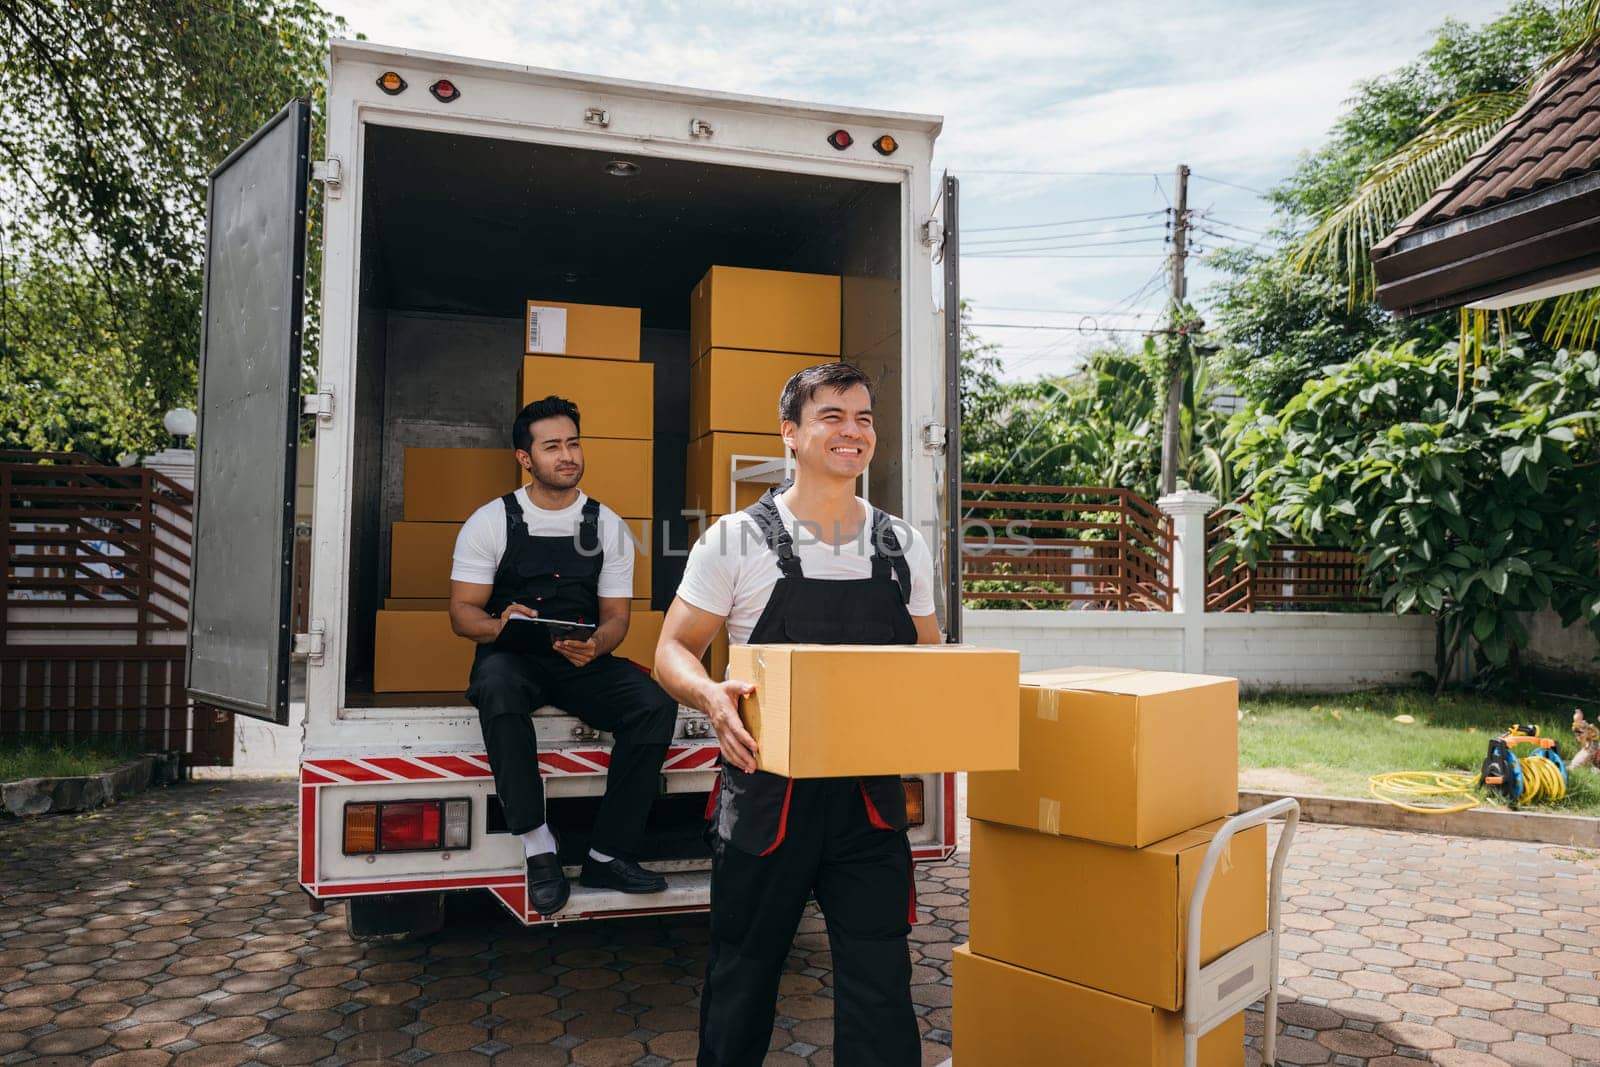 Delivery men unload boxes from a truck. Movers in uniform cooperate in a relocation service. Teamwork and cooperation among colleagues. Smiling workers carrying boxes. relocation teamwork Moving Day